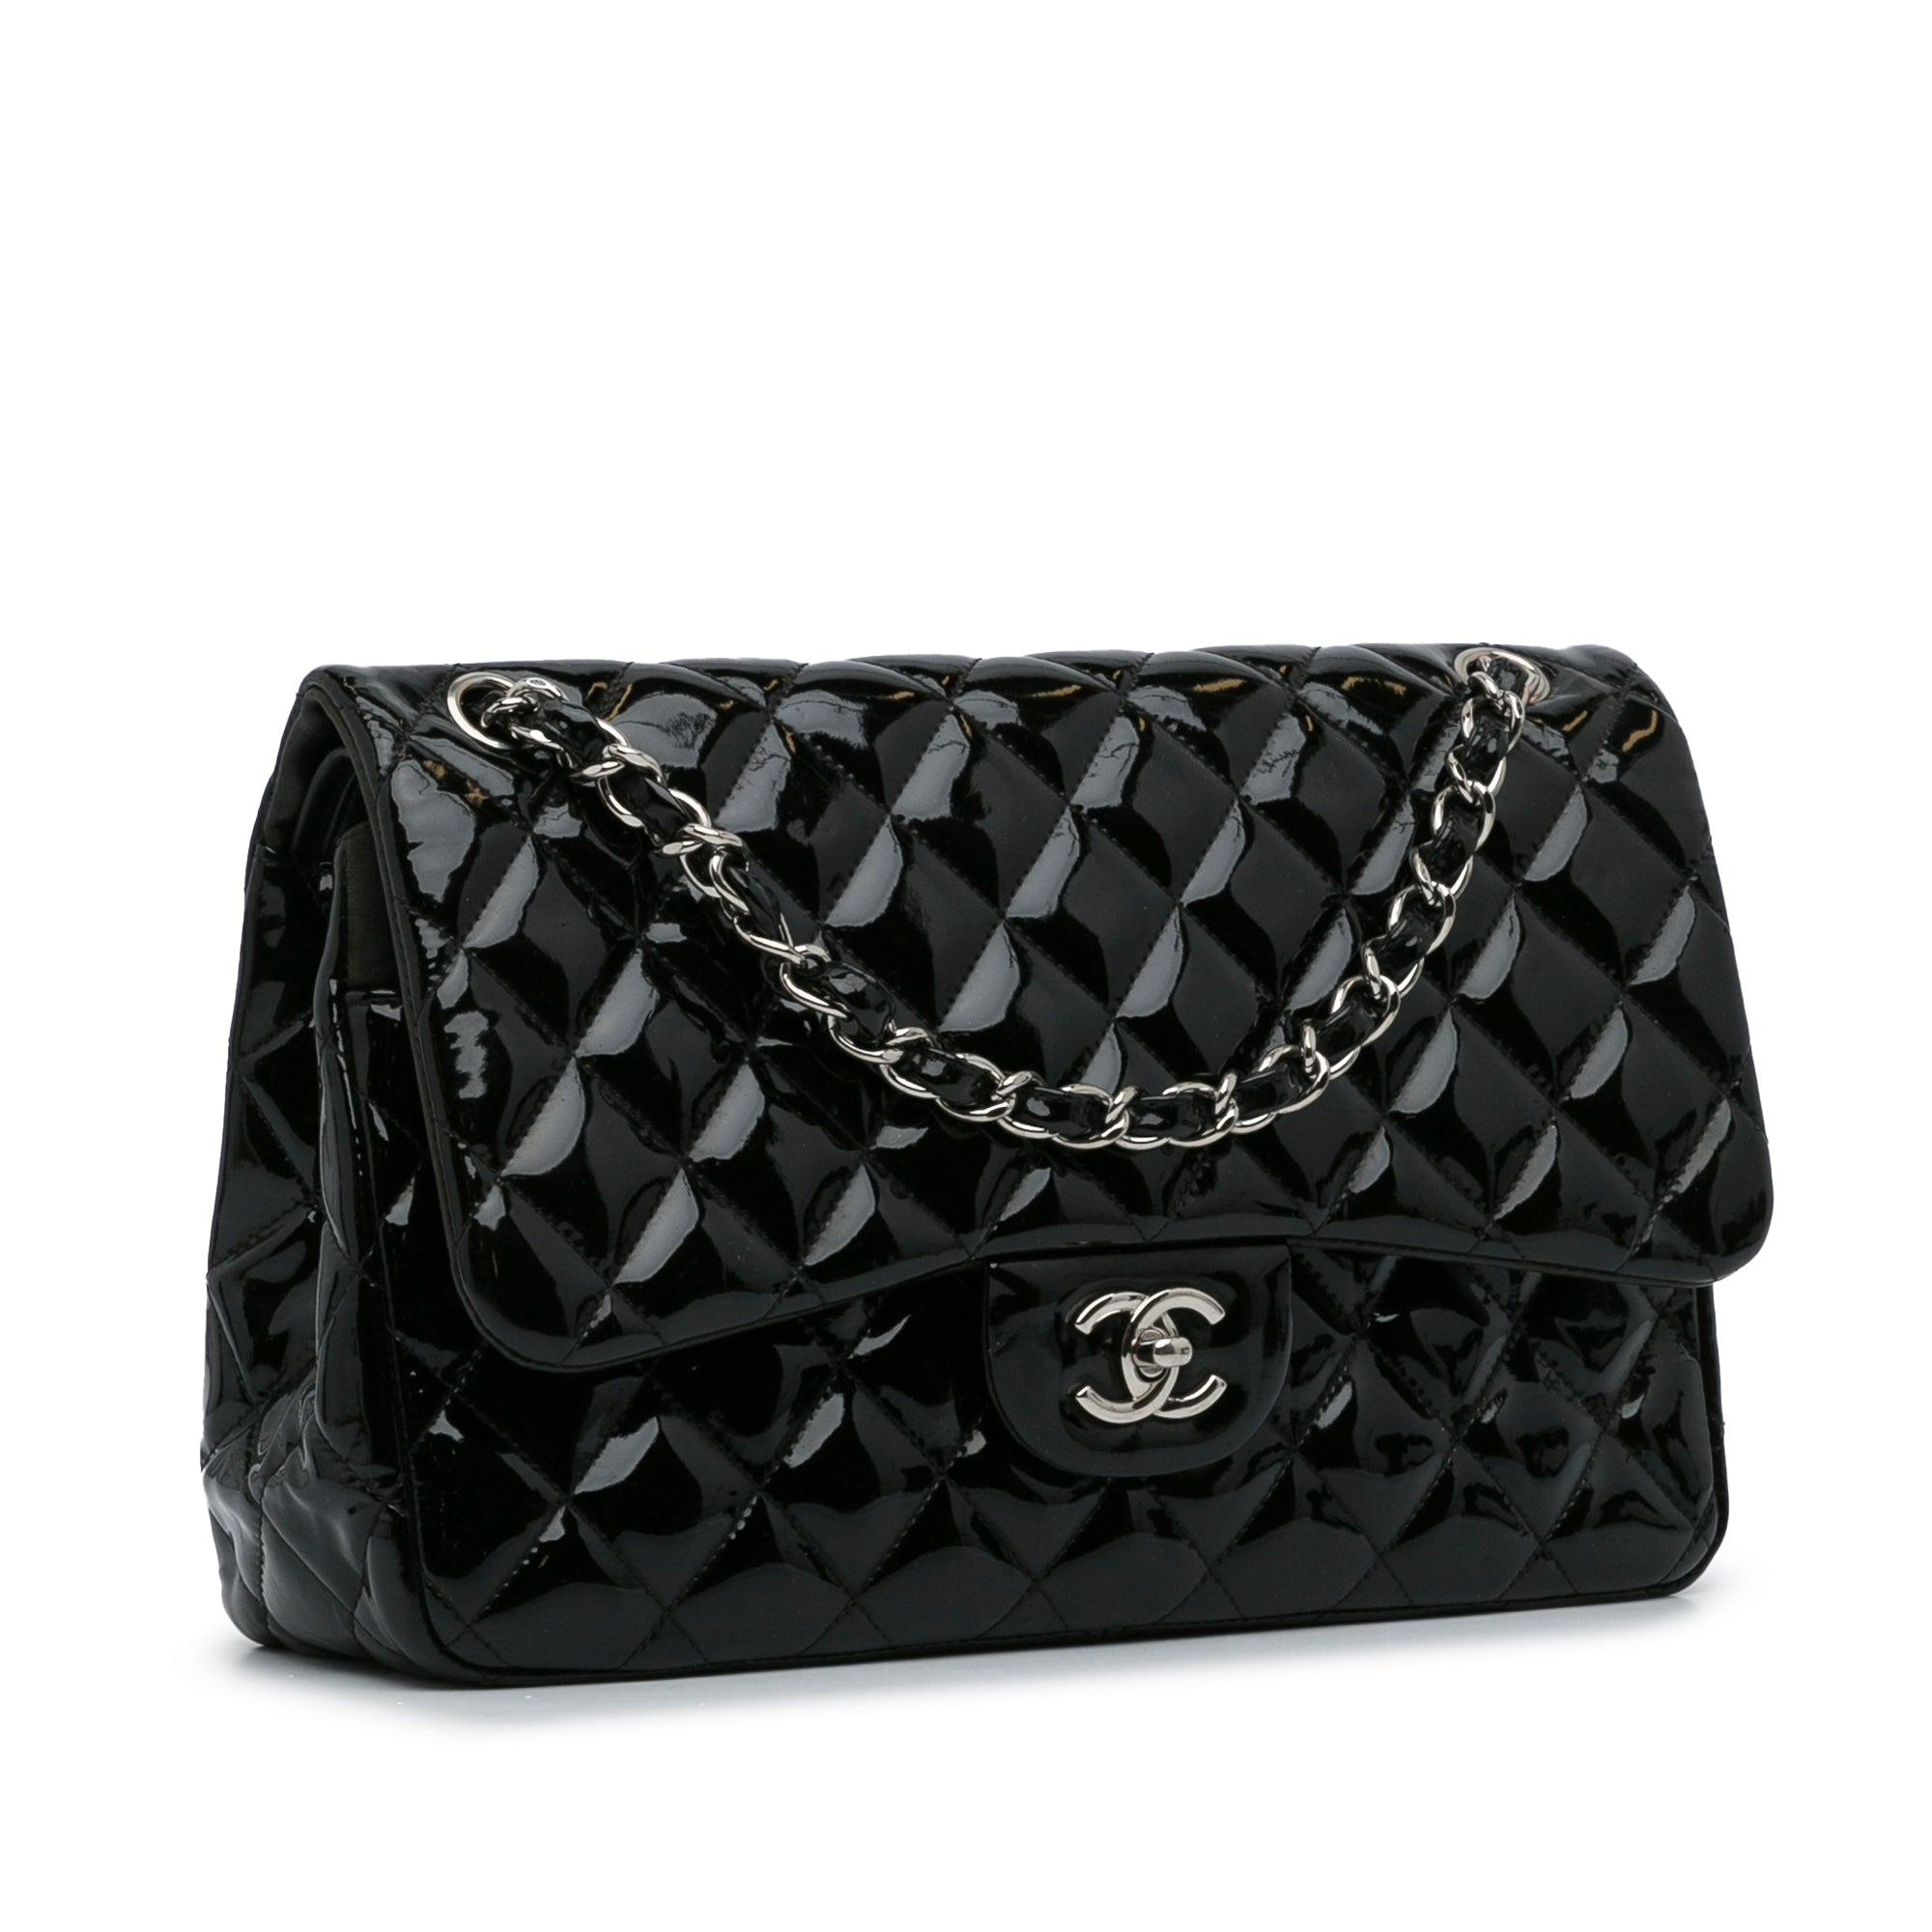 Chanel Black Patent Leather Jumbo Classic Double Flap Bag Chanel